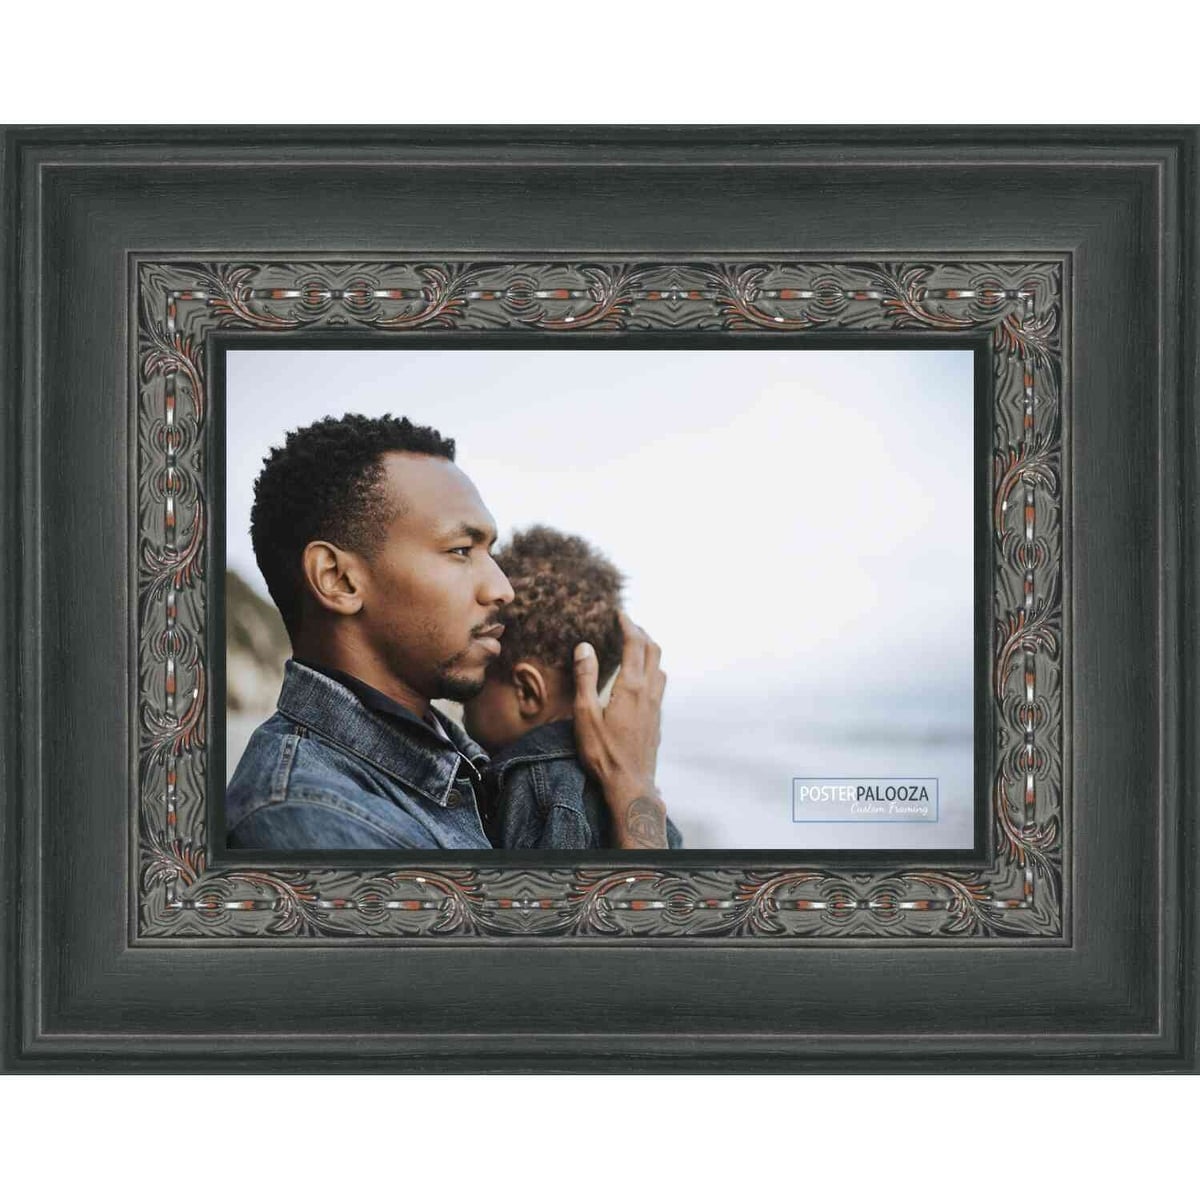 https://ak1.ostkcdn.com/images/products/is/images/direct/92cb97d6cbbe5f09557f04f635c96fc169eba6a5/4x7-Distressed-Aged-Black-Complete-Wood-Picture-Frame-with-UV-Acrylic%2C-Foam-Board-Backing%2C-%26-Hardware.jpg